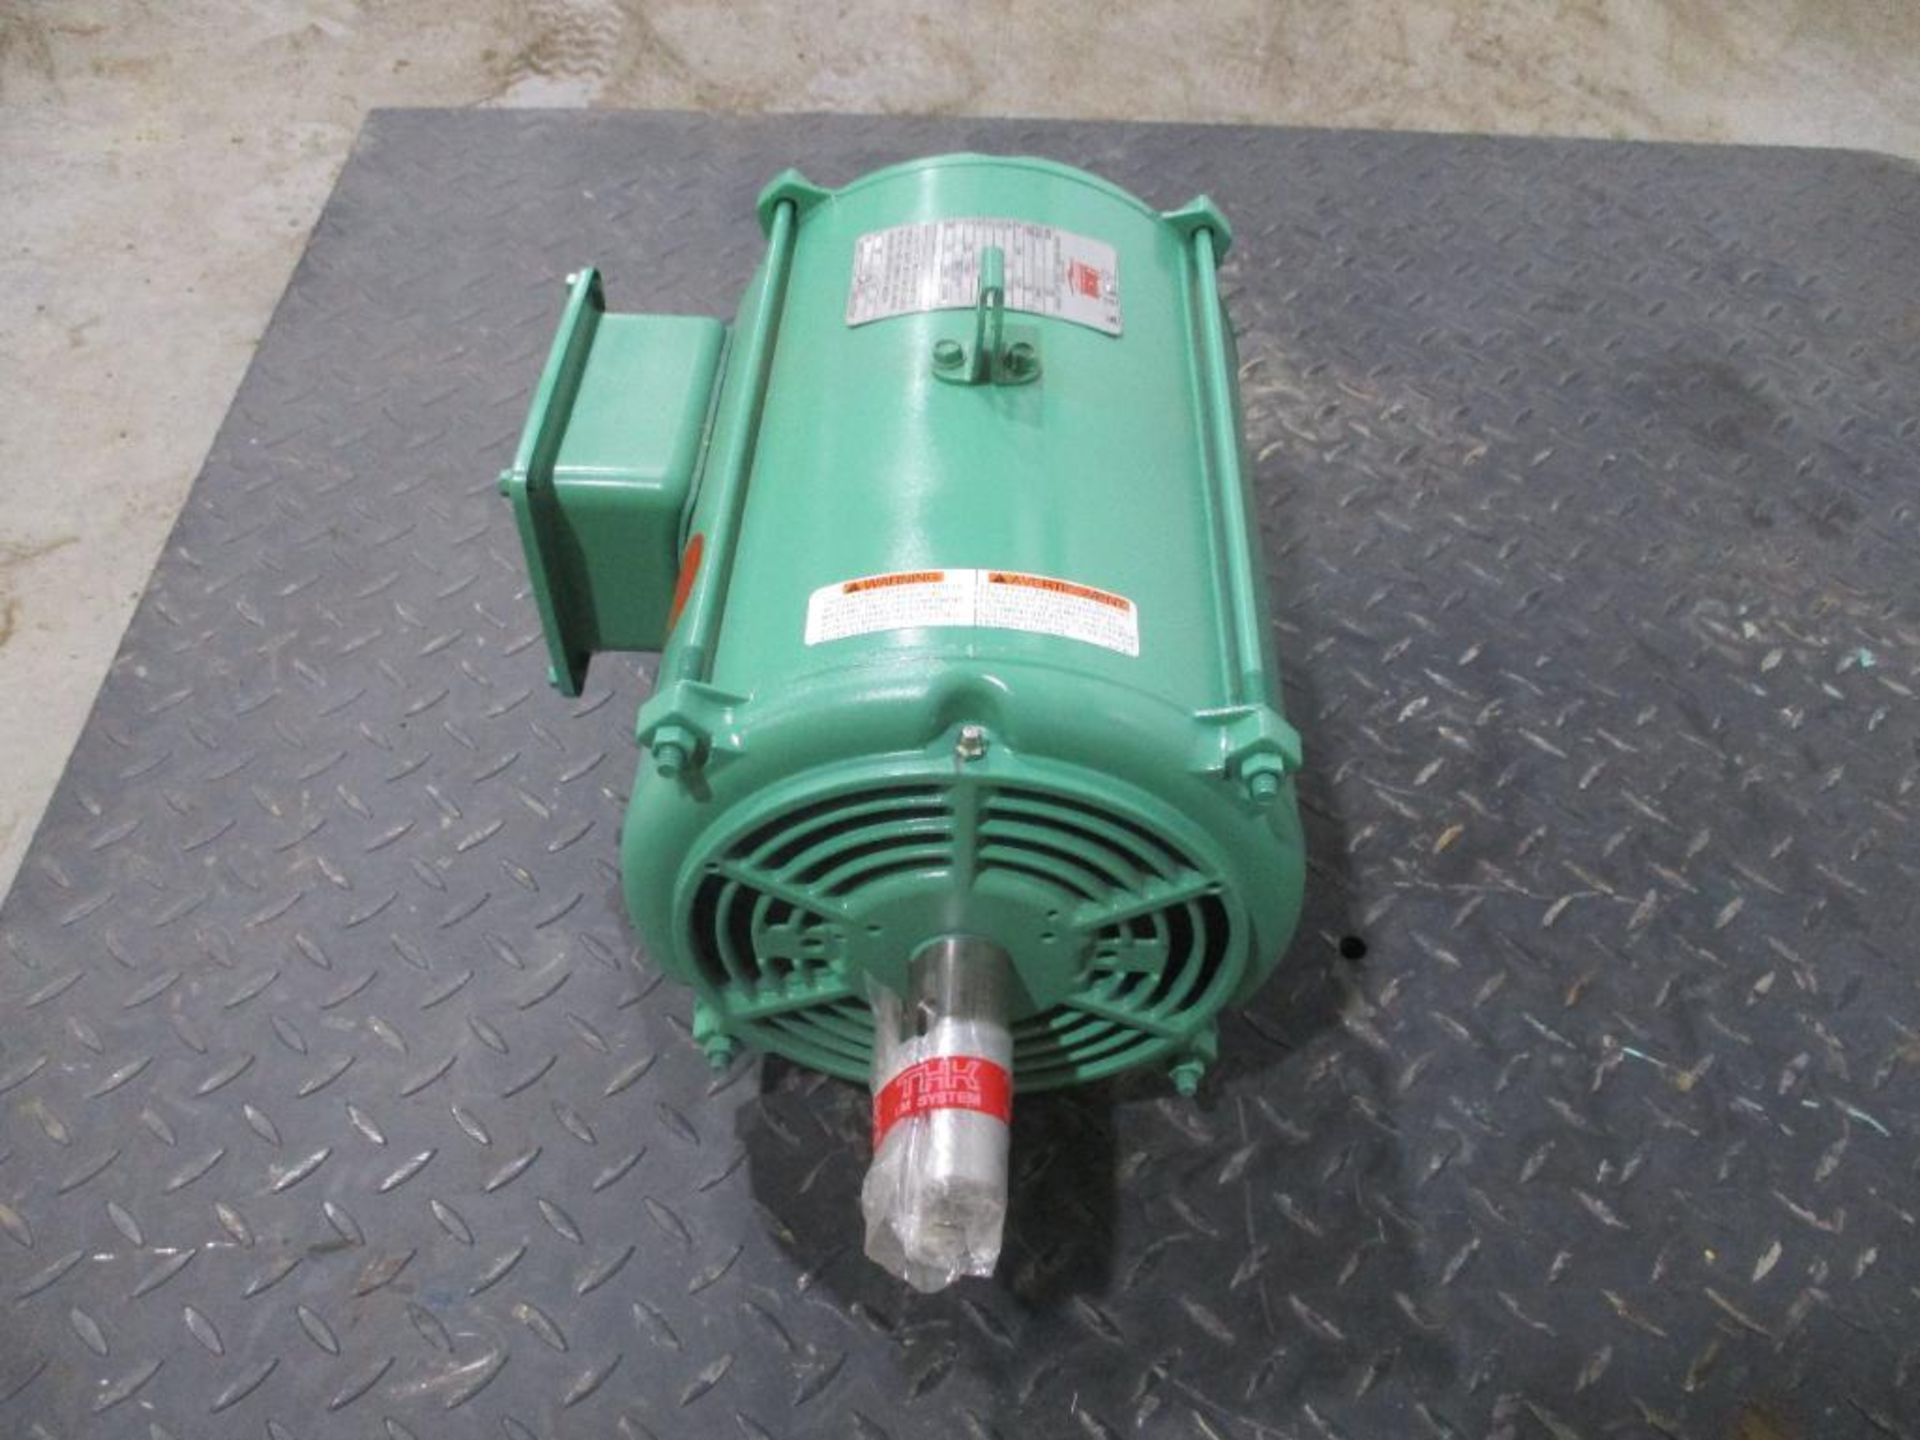 LINCLON MOTORS 3 PHASE 7 1/2HP 1515/2910RPM 213T FRAME A/C MOTOR P/N LM32740A, 103# lbs (There will - Image 2 of 5